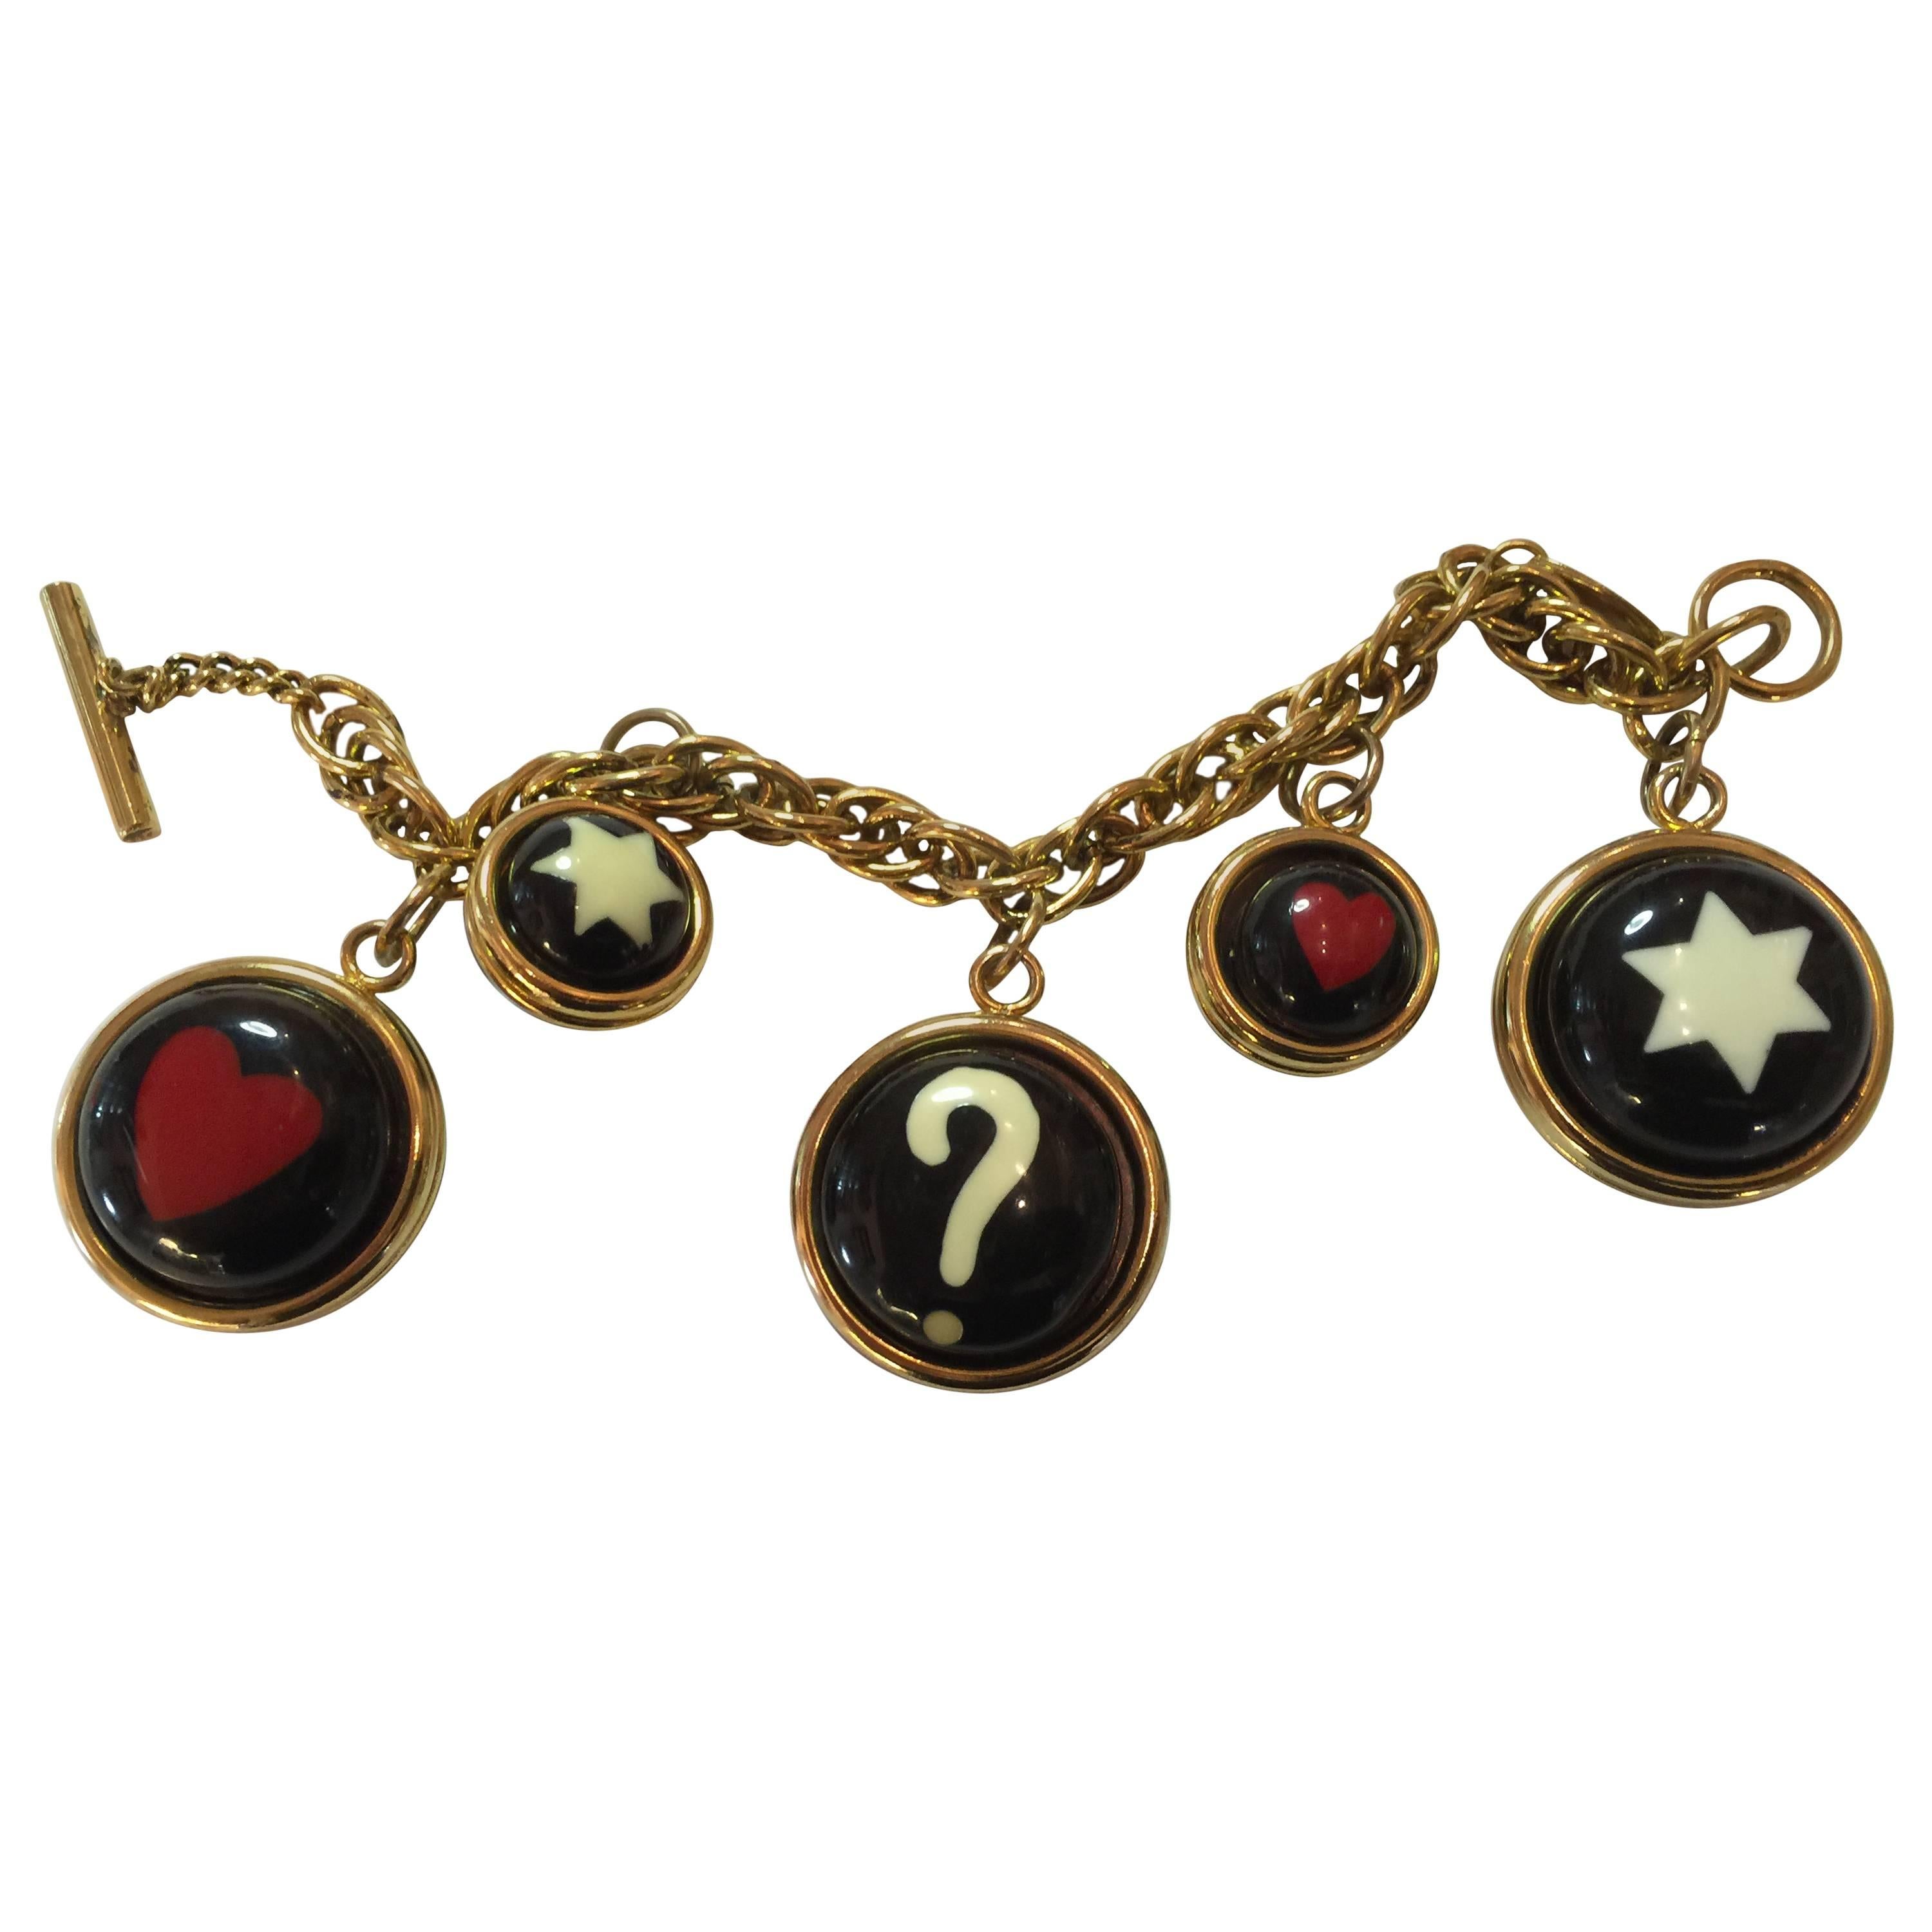 1990s  MOSCHINO Enamel and Goldtone Question Mark/Heart Charm Bracelet For Sale